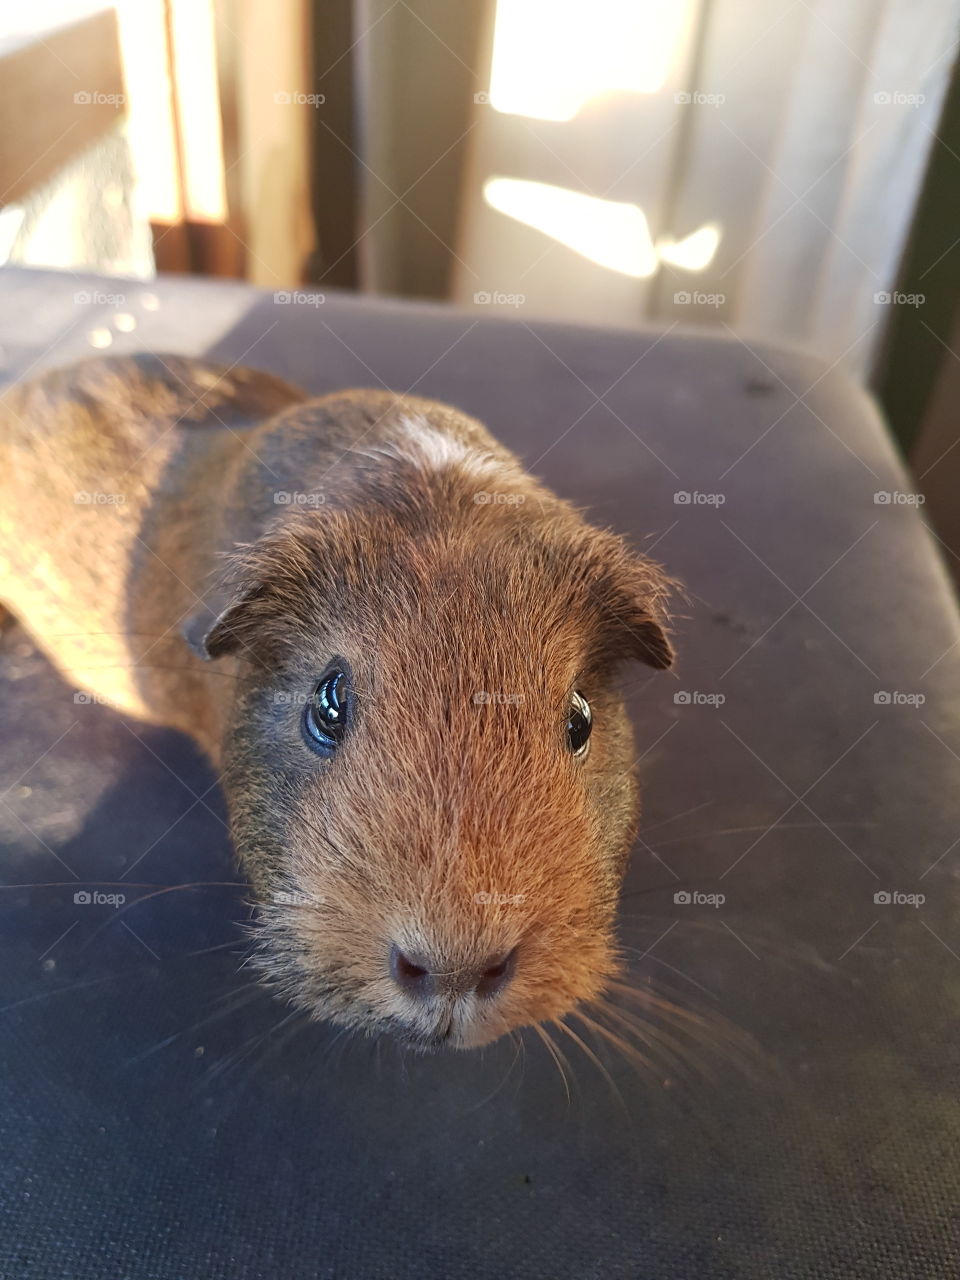 Guinea pig he is hungry! First he must pose for a picture yes! And his reward a piece of broccoli and carrot for dinner.